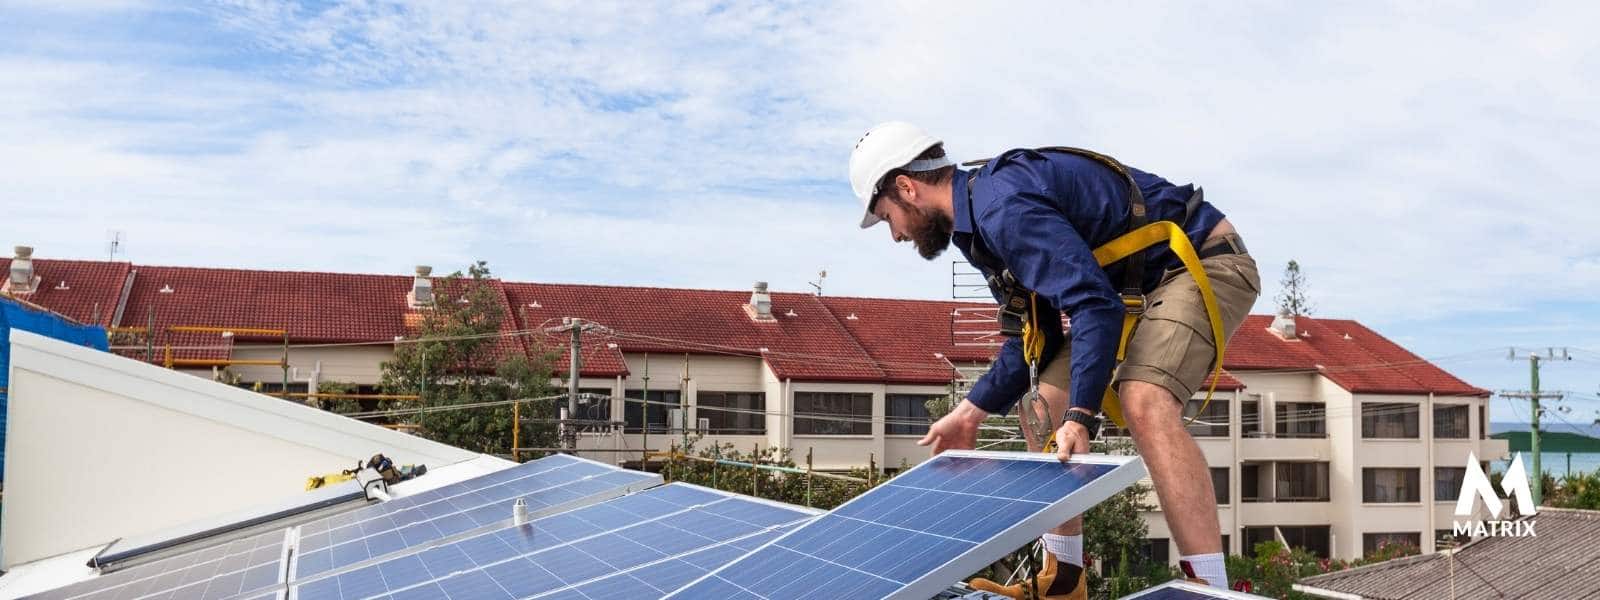 solar industry in the US?